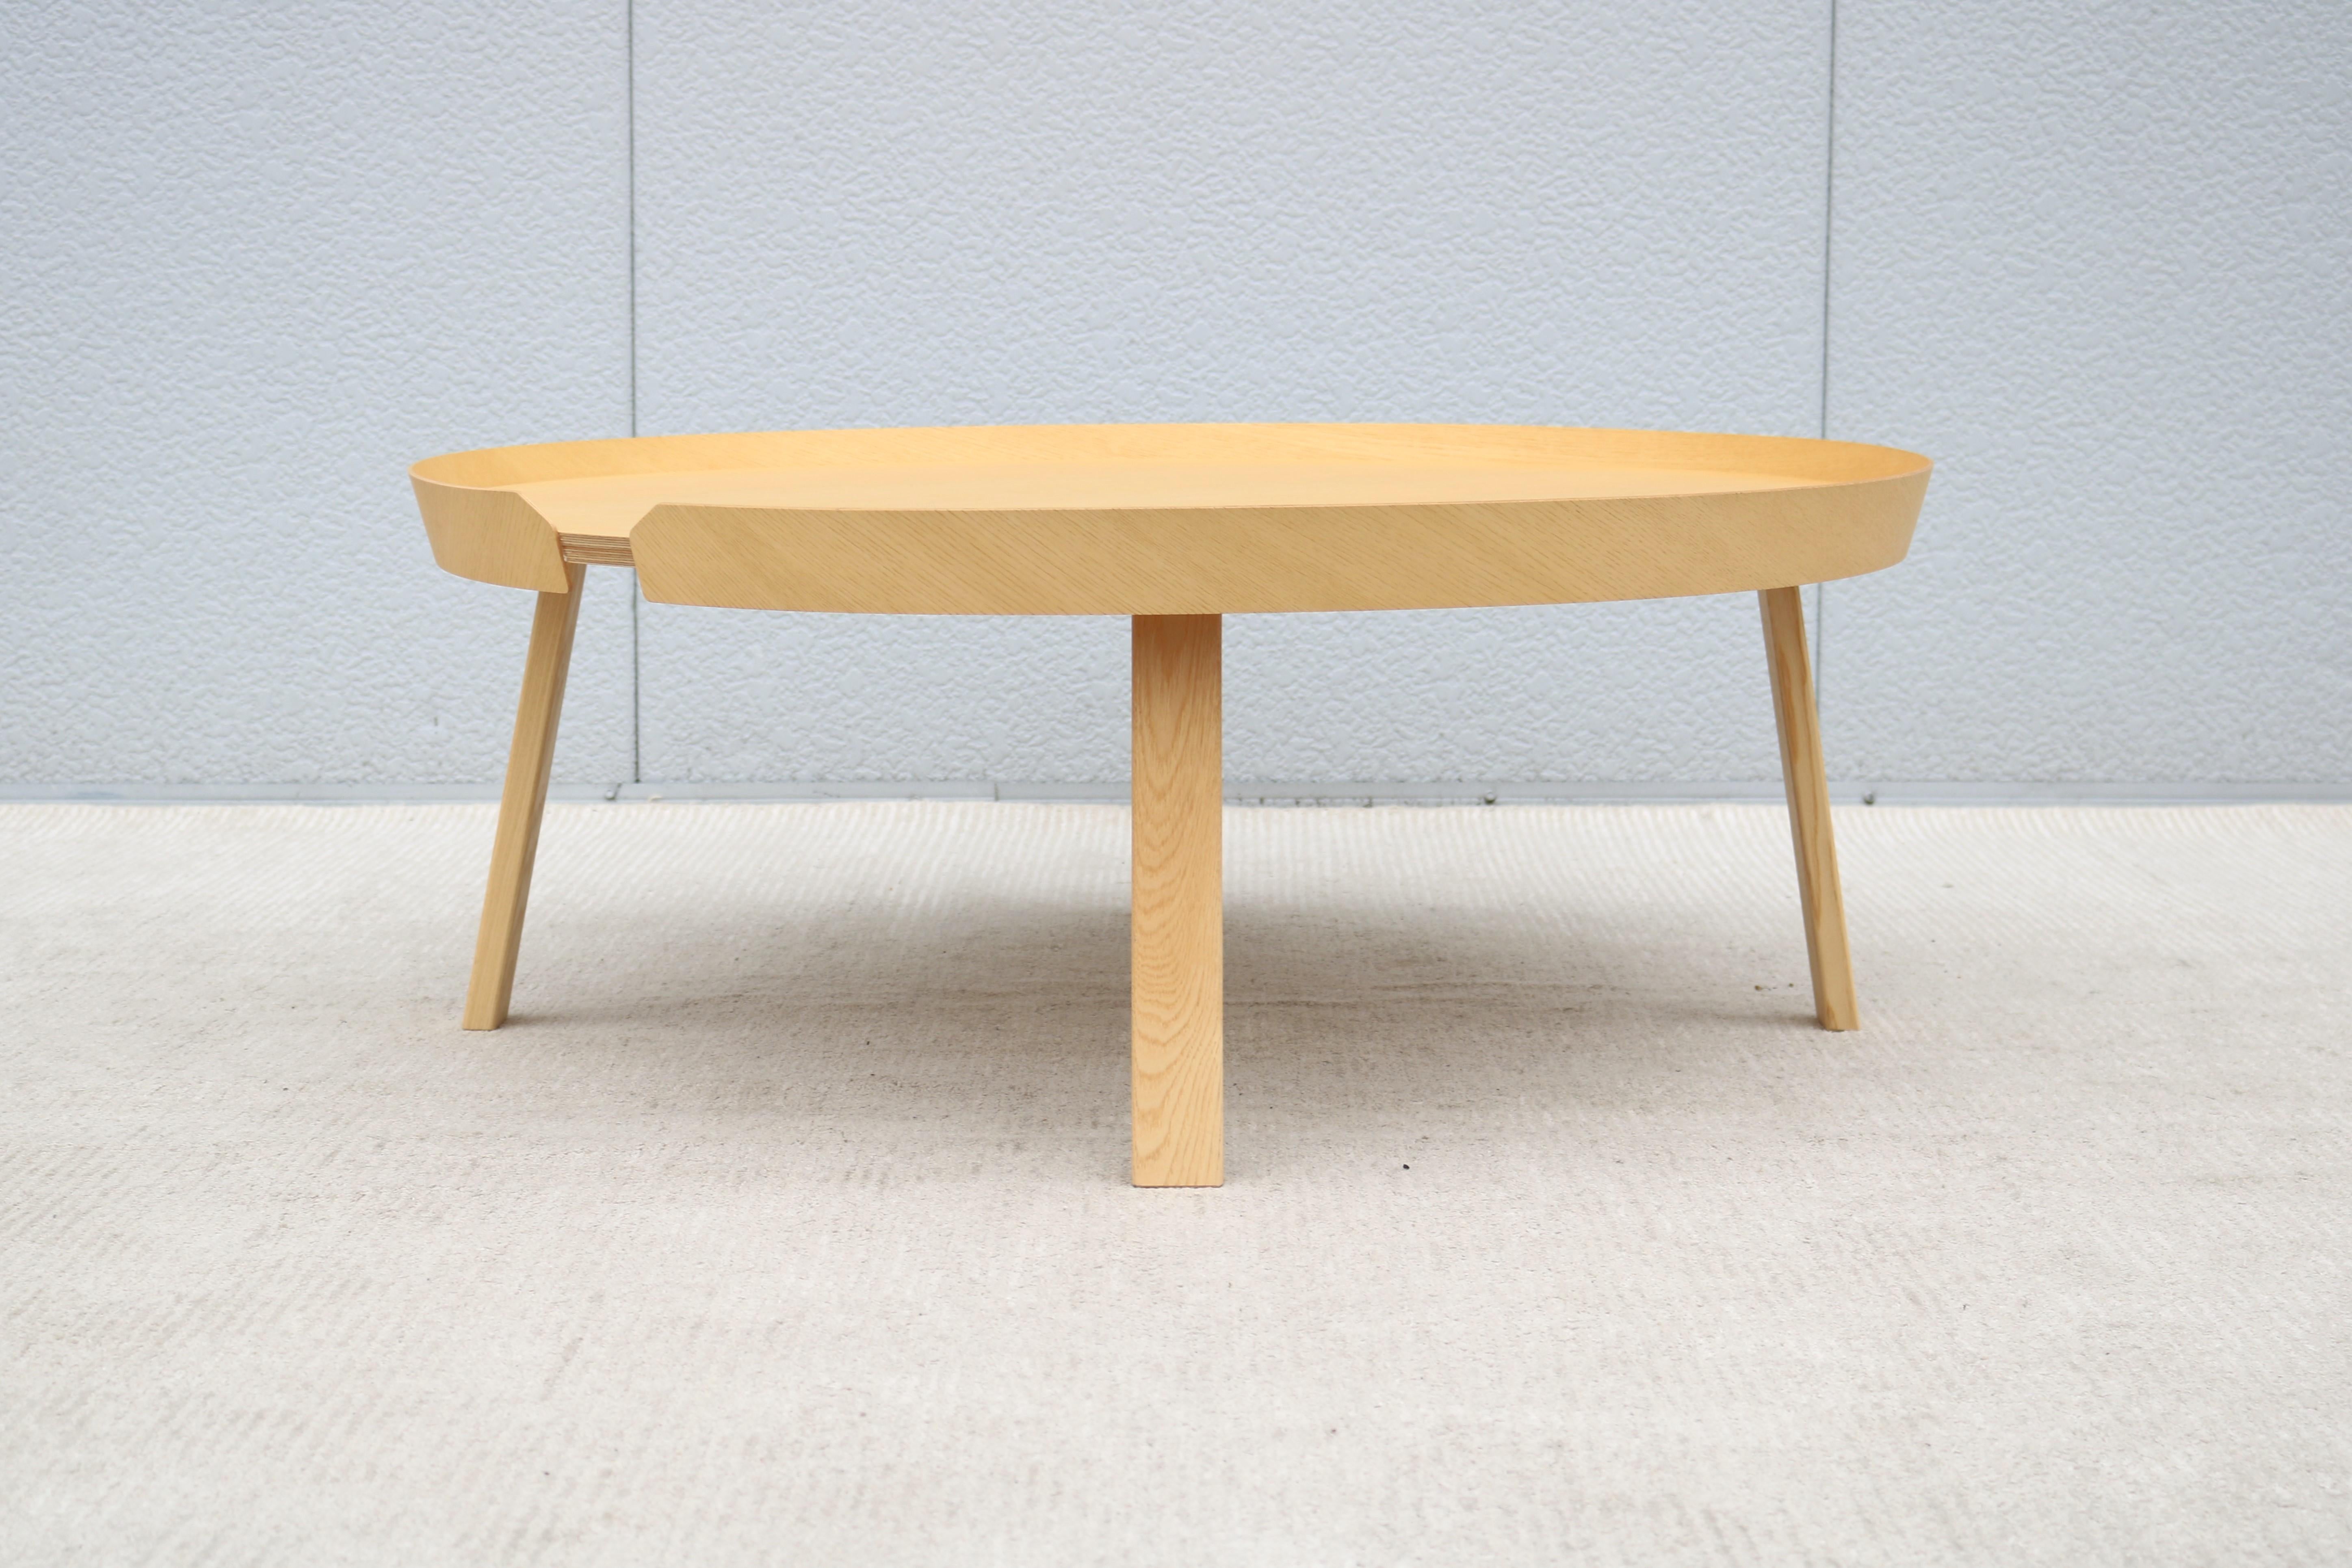 Lacquered Scandinavian Modern Thomas Bentzen for Muuto Around Extra Large Oak Coffee Table For Sale